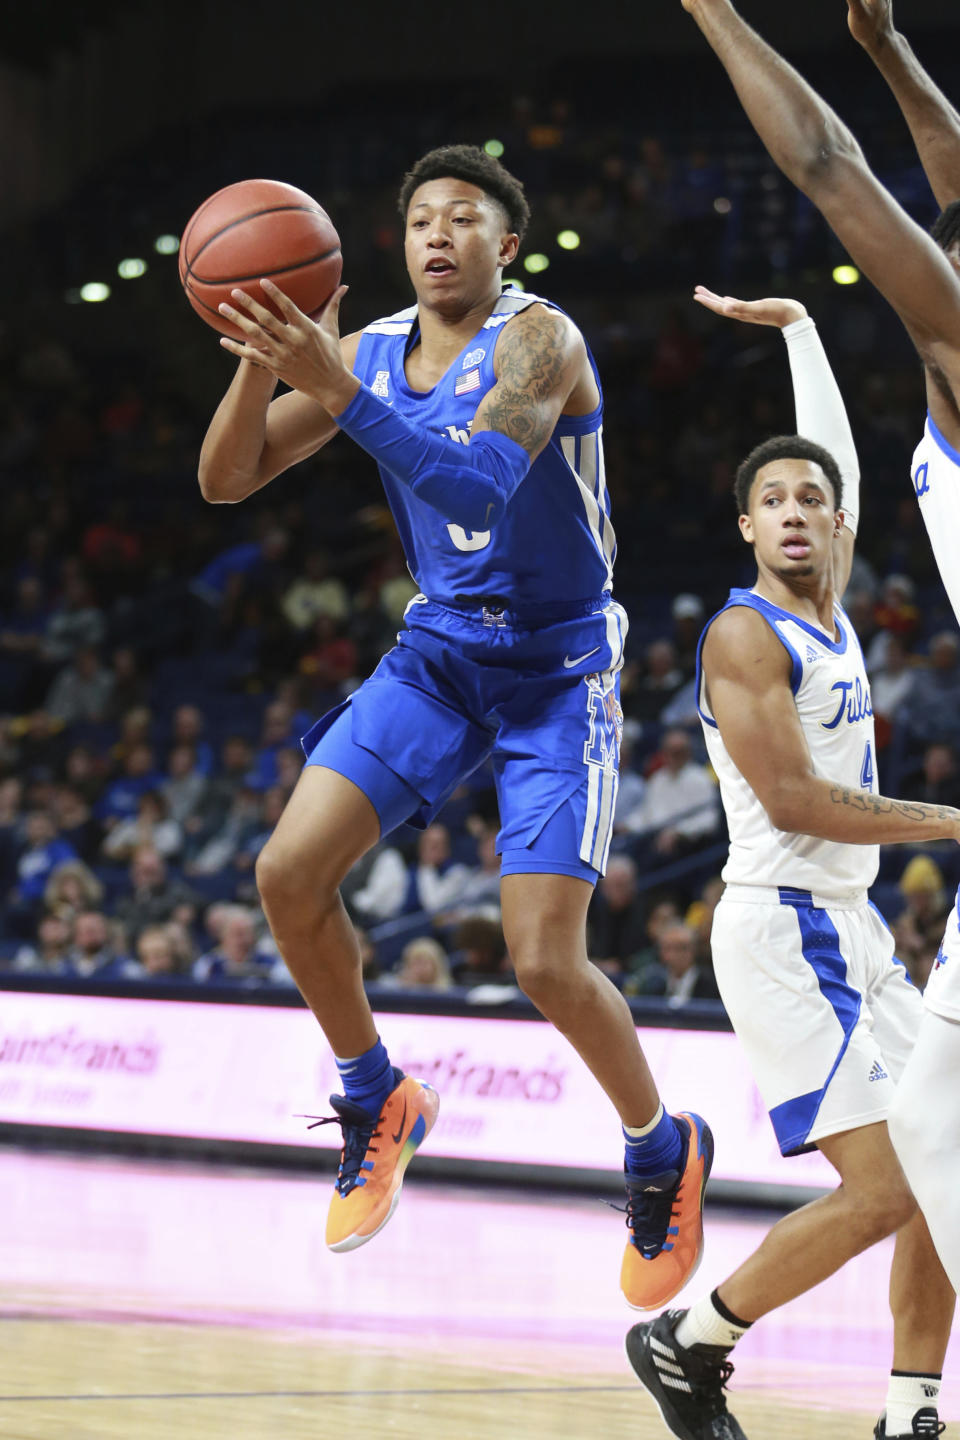 Memphis guard Boogie Ellis (5) passes in the first half of an NCAA college basketball game against Tulsa in Tulsa, Okla., Wednesday, Jan. 22, 2020. (AP Photo/Joey Johnson)